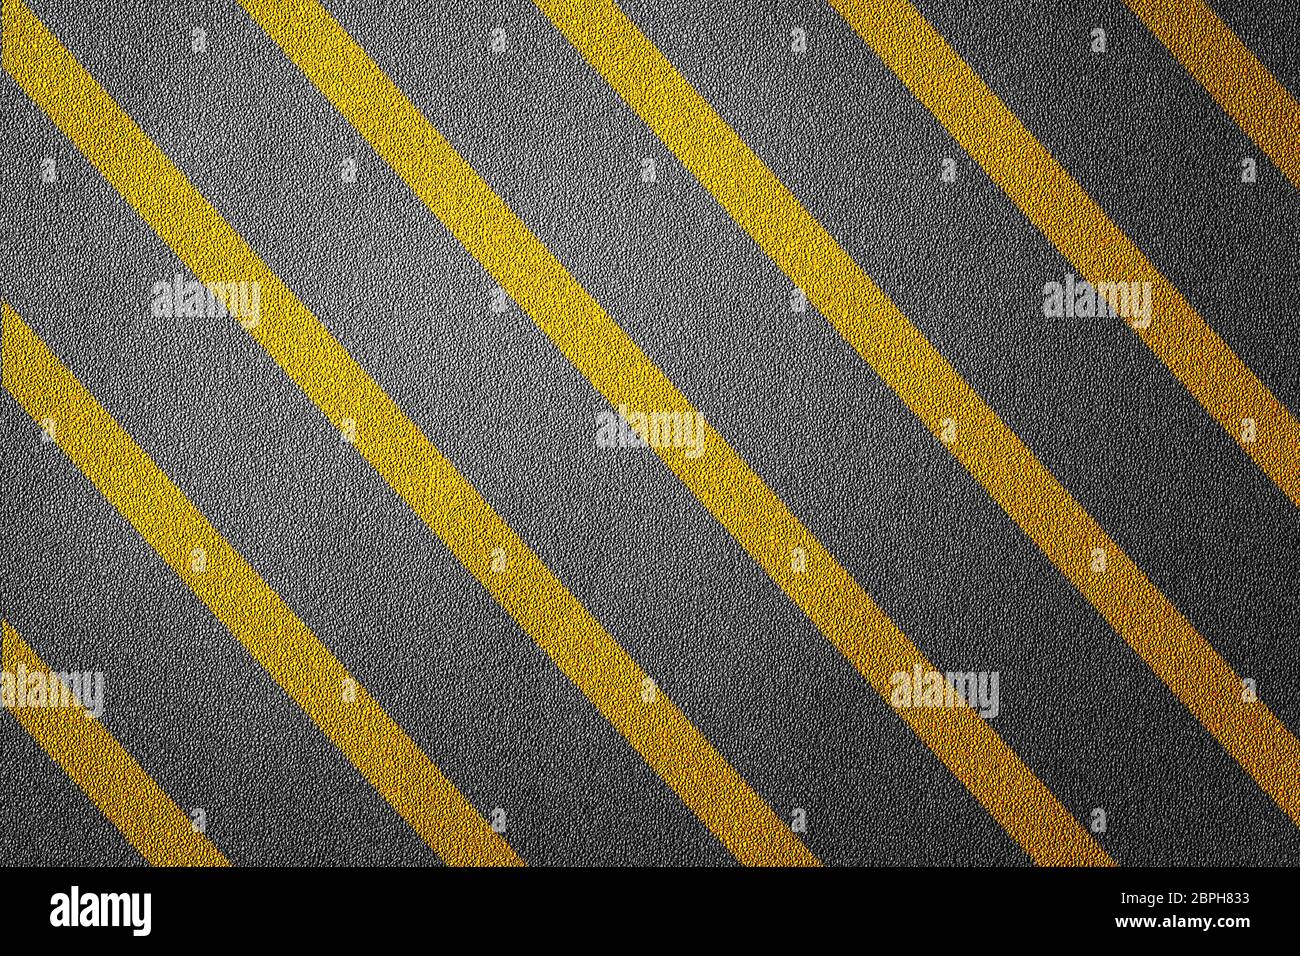 3D Illustration of a road restricted with yellow lines pattern and background, textured traffic rules concept Stock Photo